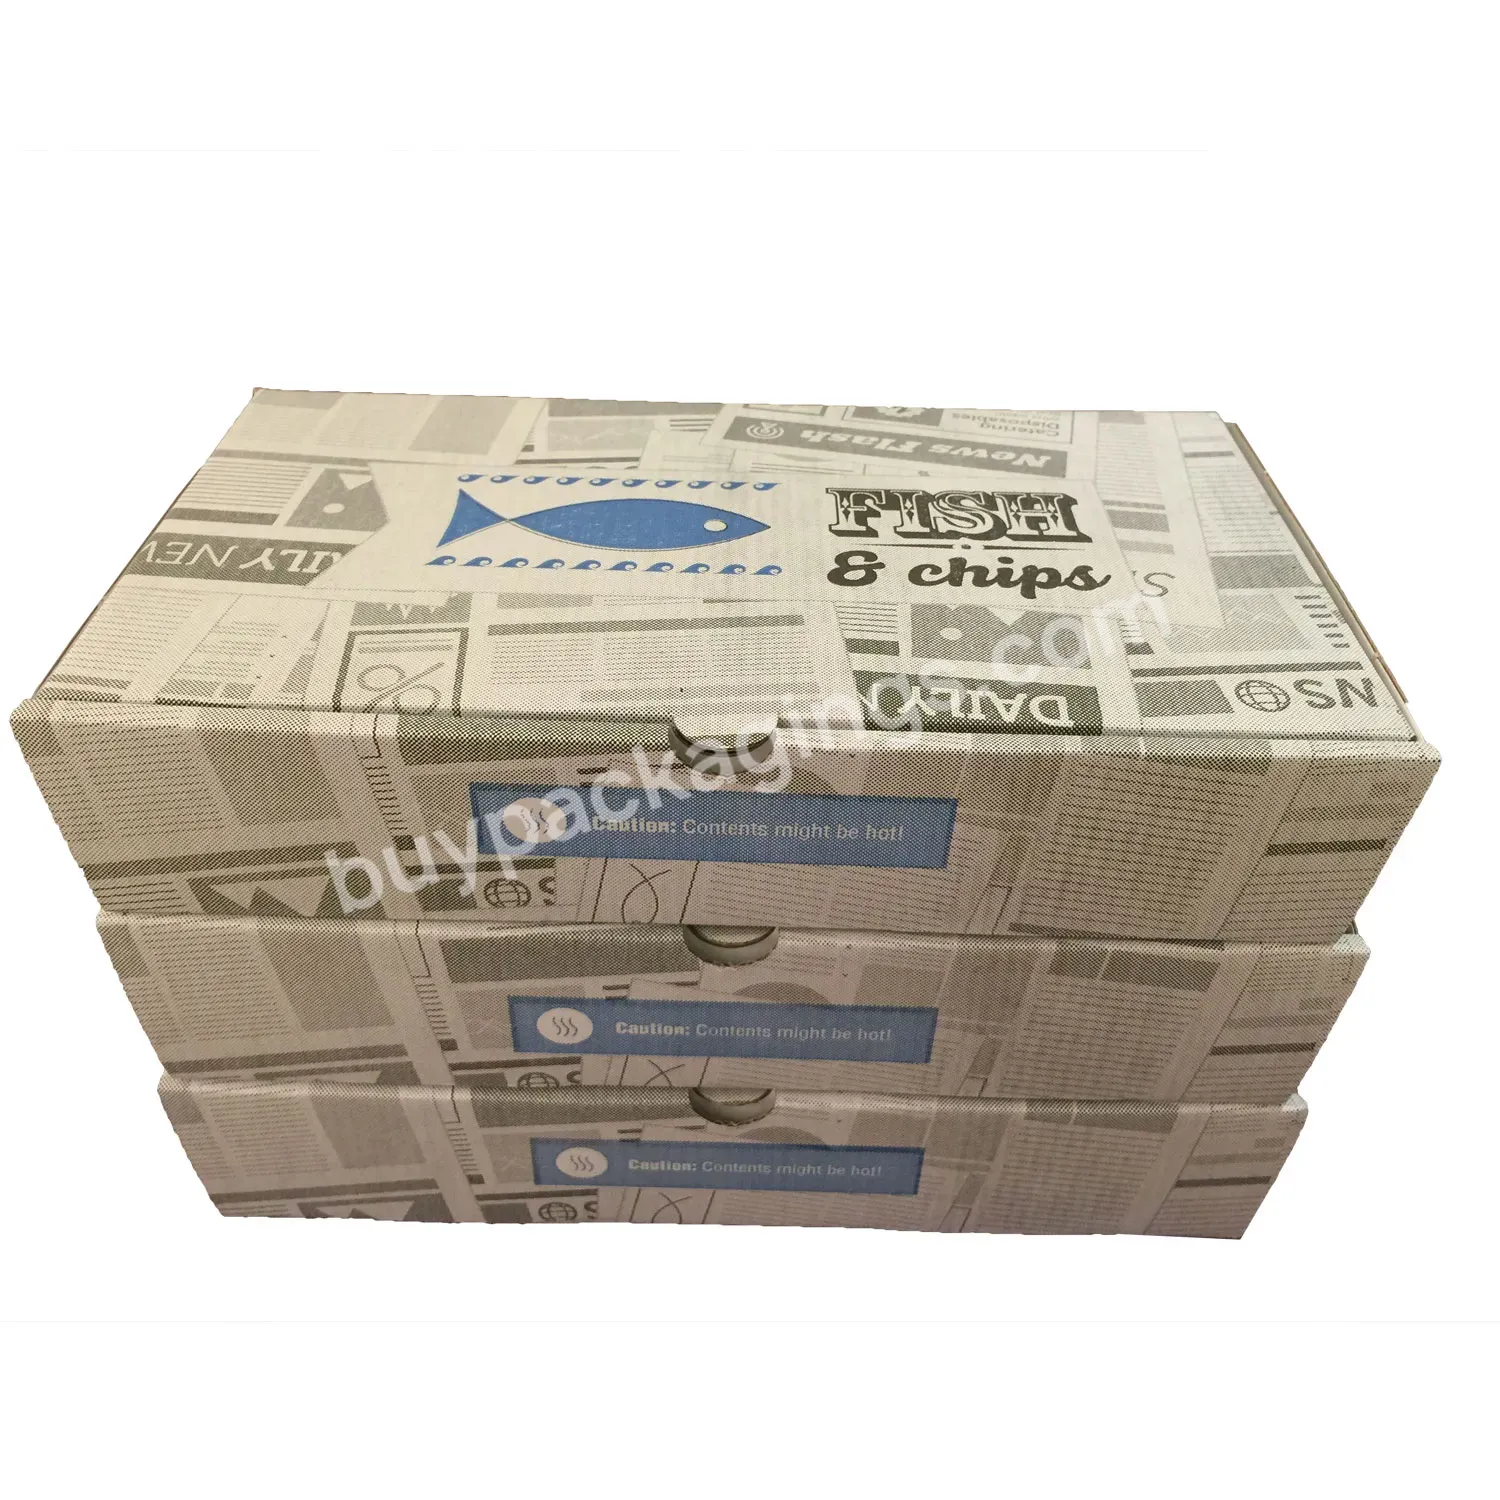 Hot Selling European Paper Fish And Chips Packaging Carton Fish And Chips Takeaway Food Carton